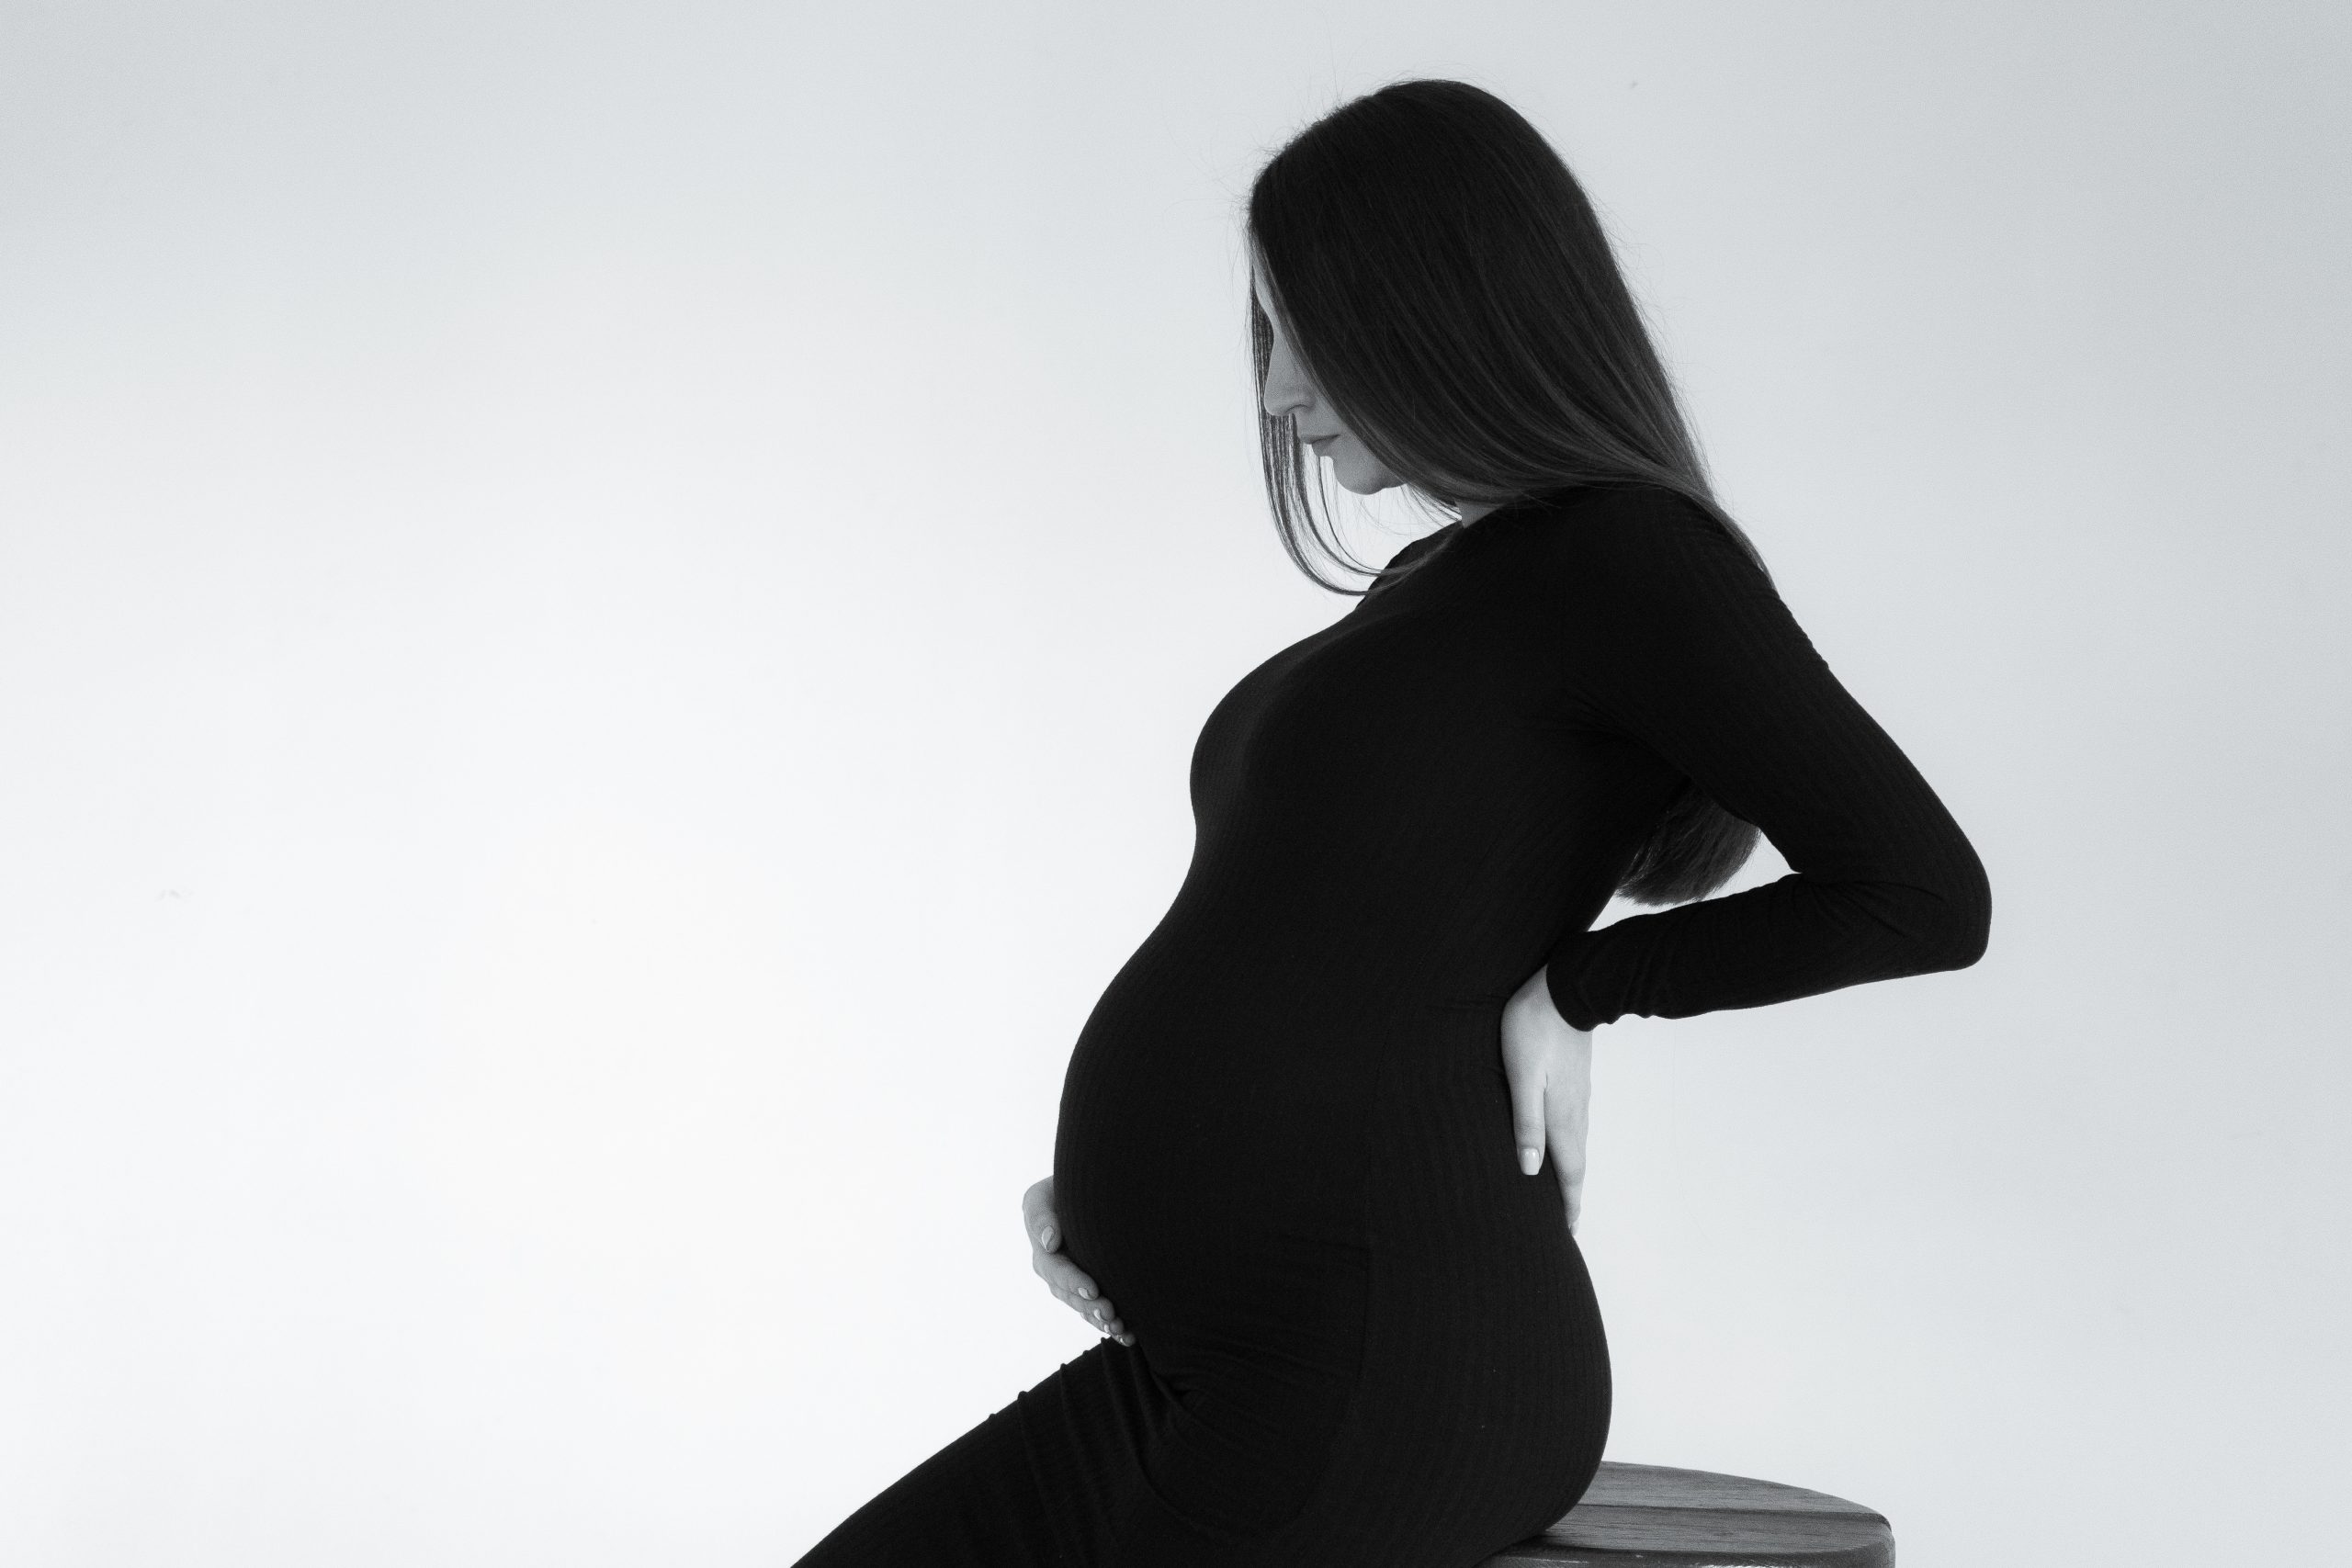 pregnant woman with back pain